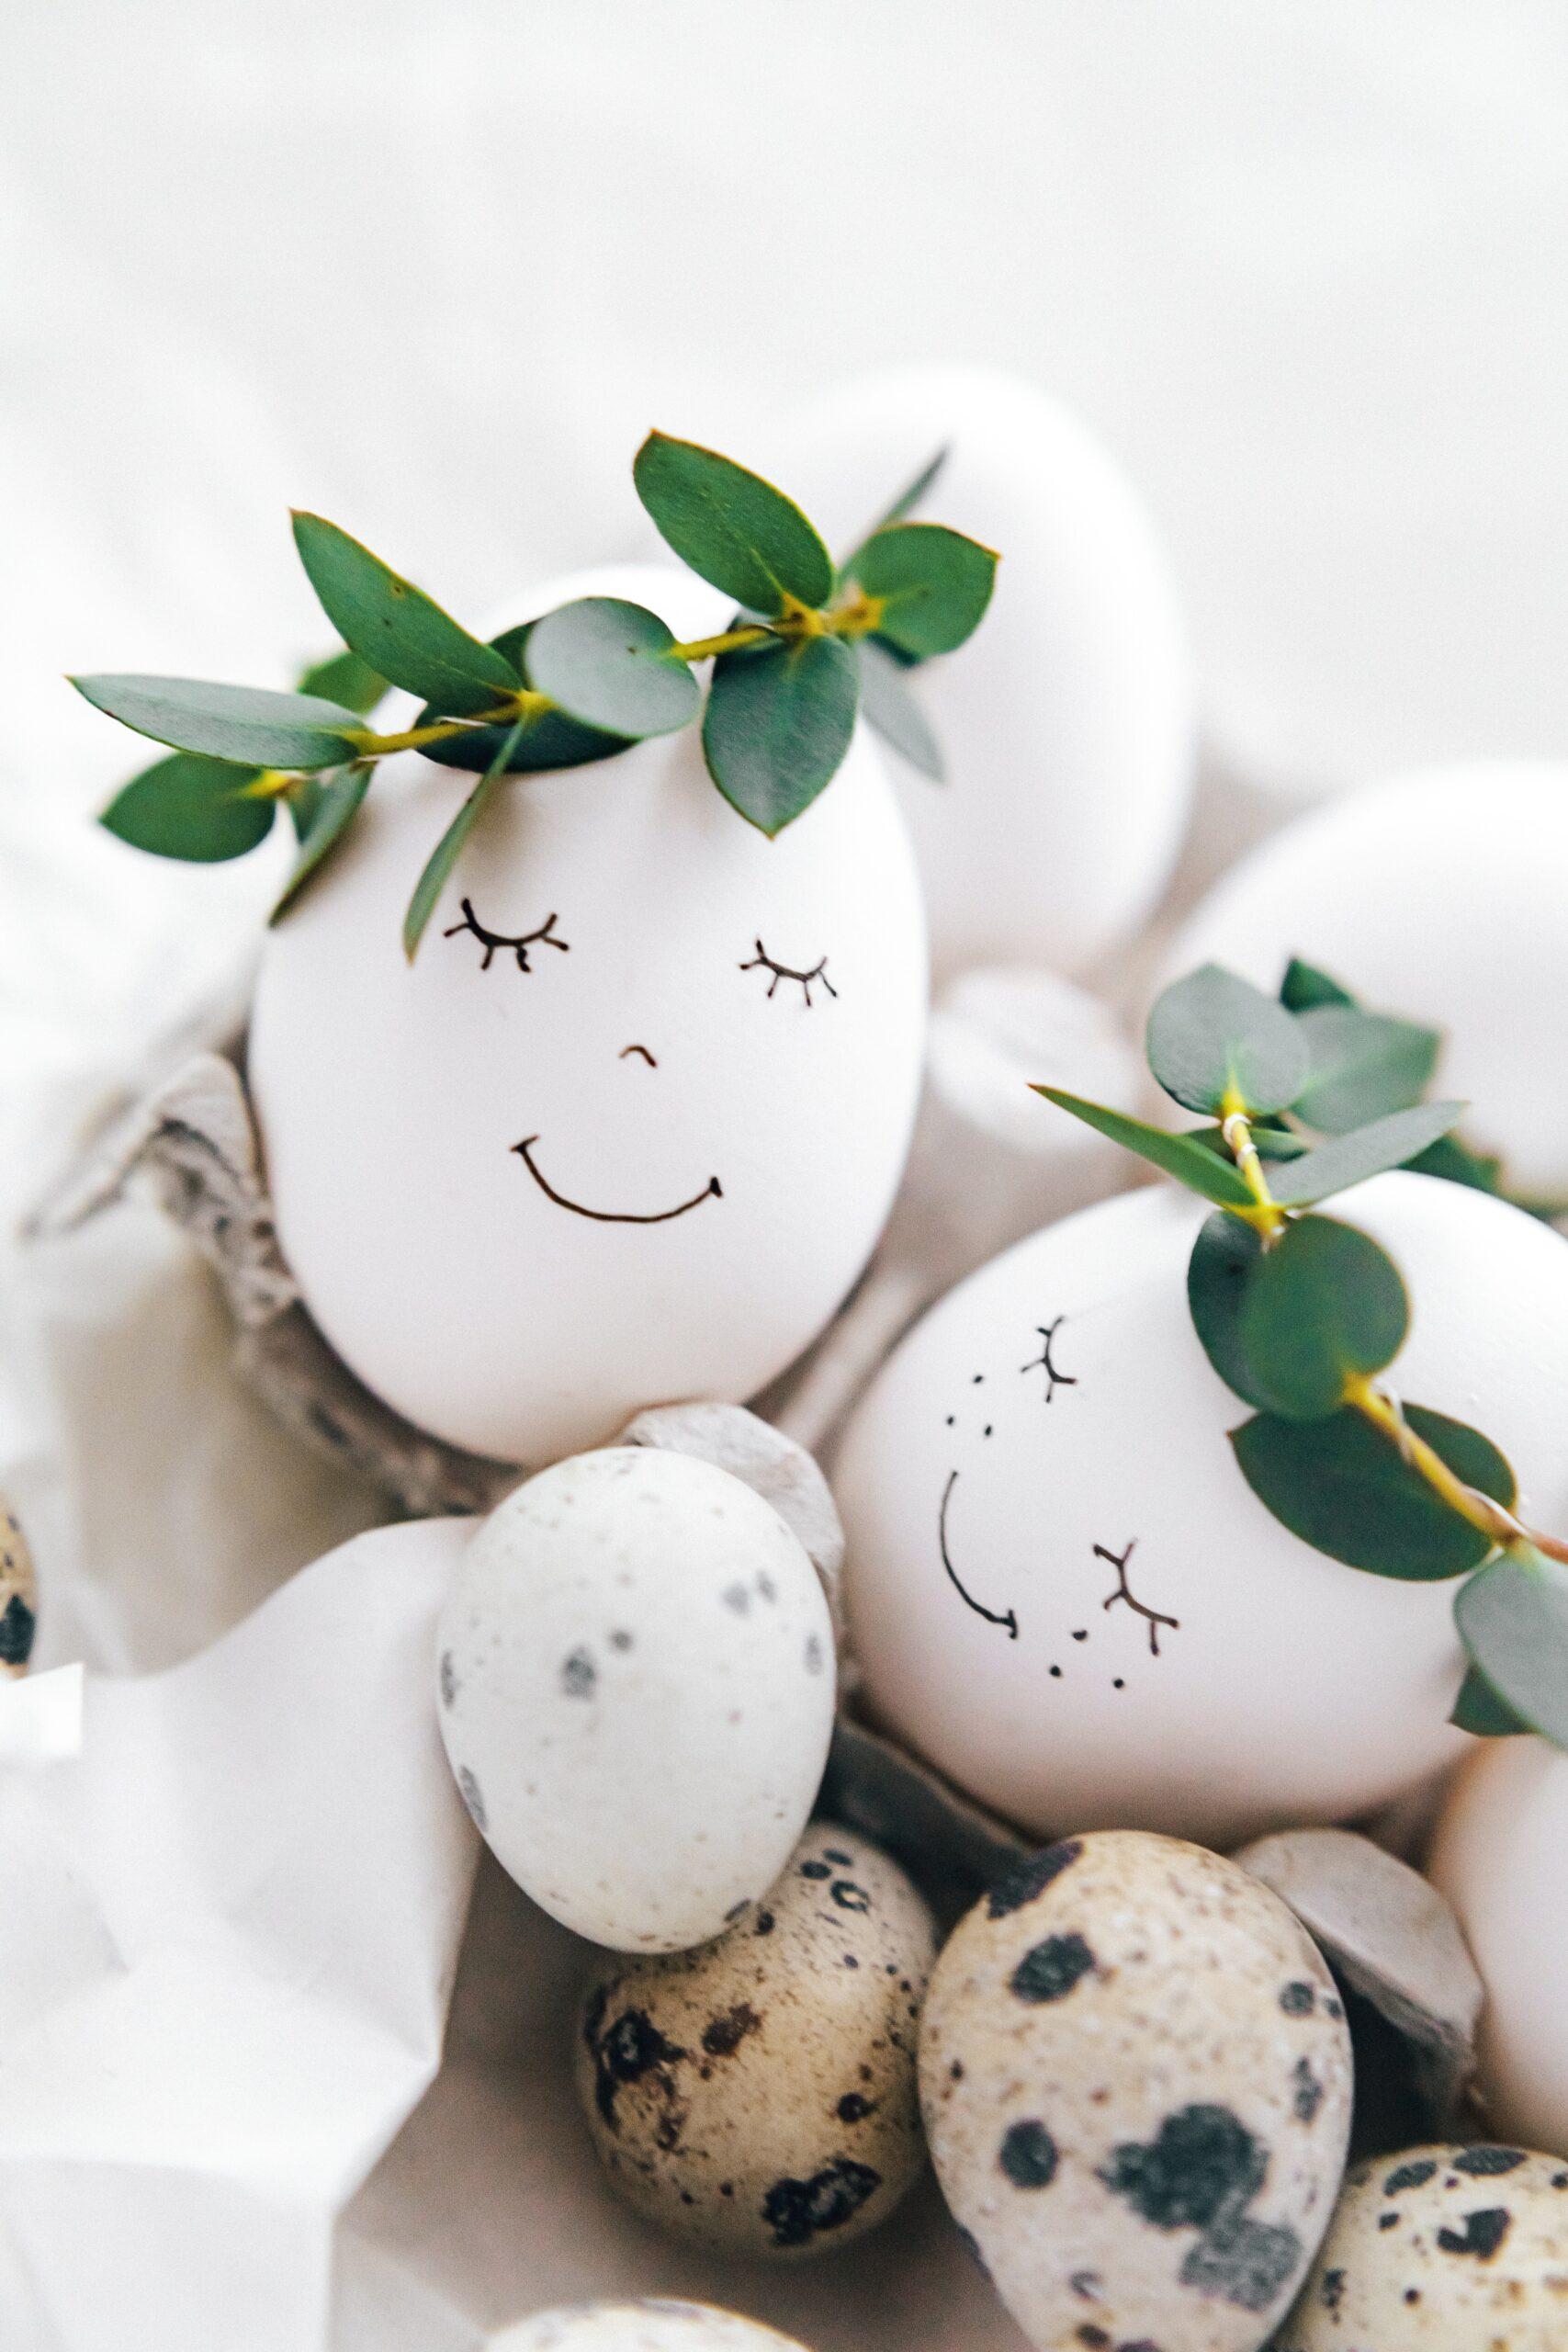 White eggs in a carton with drawn-on faces with a black marker. The eggs have greenery crowns